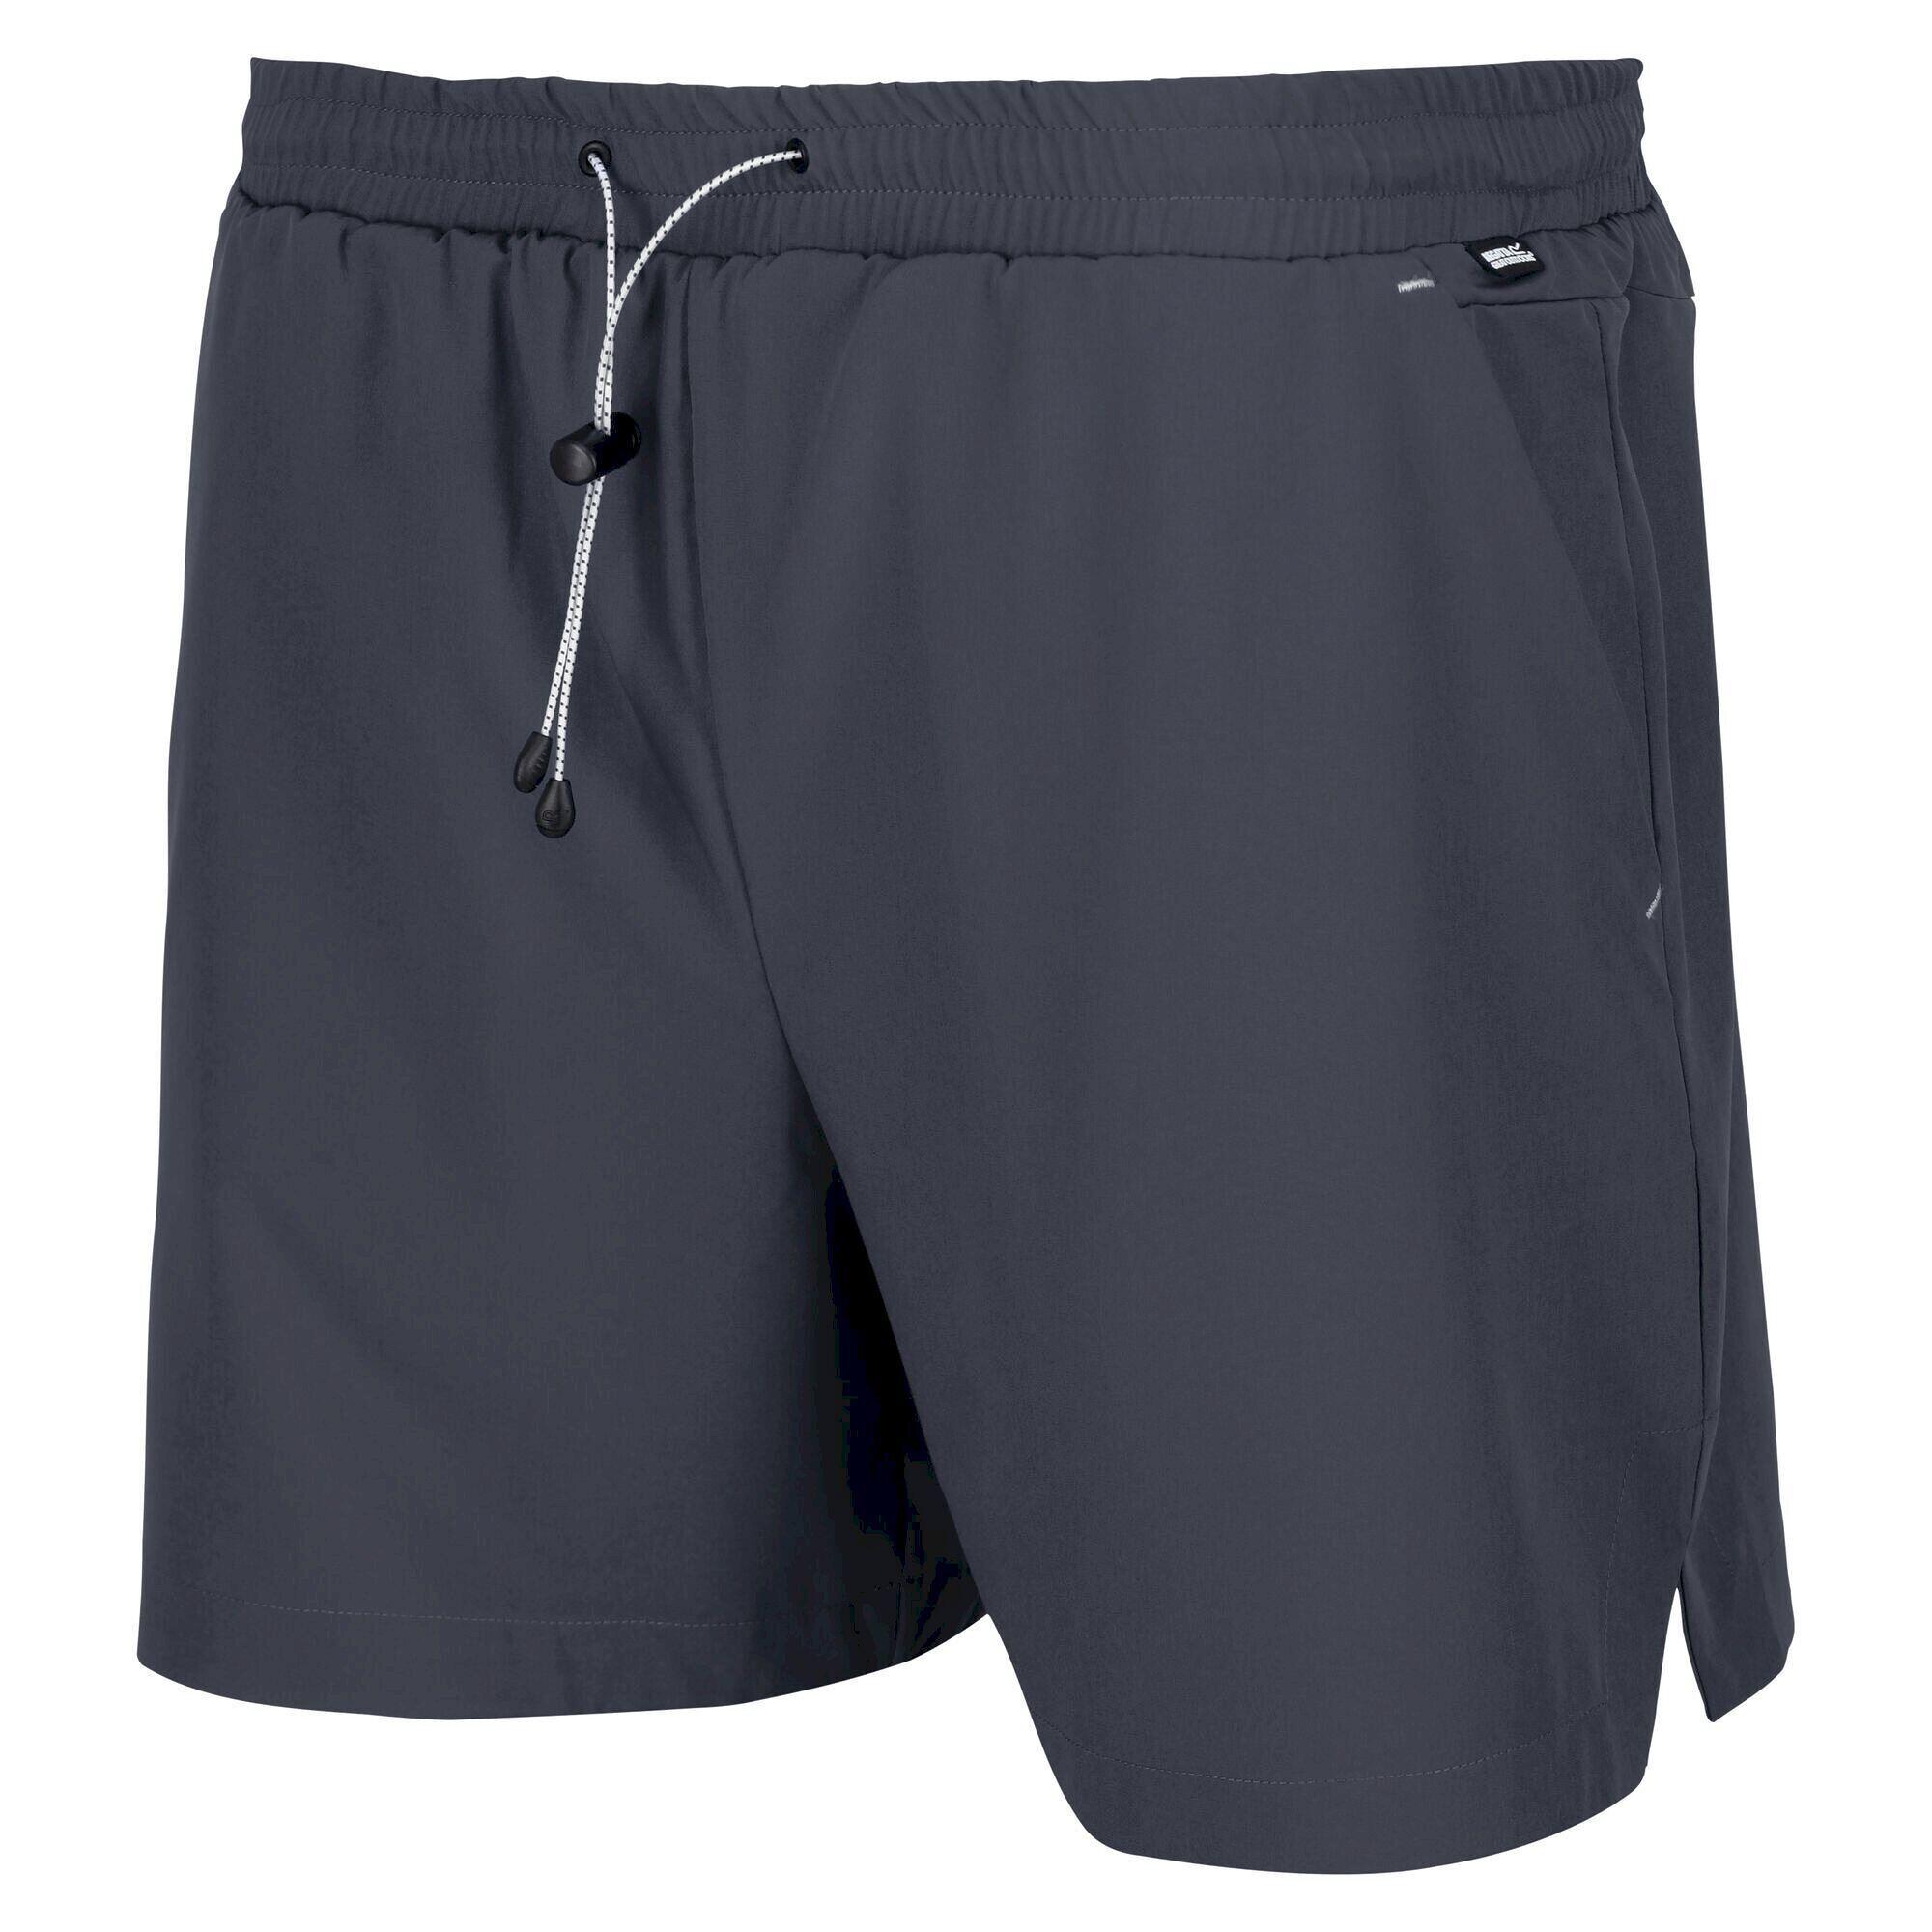 Mens Hilston 2 in 1 Shorts (India Grey) 4/5